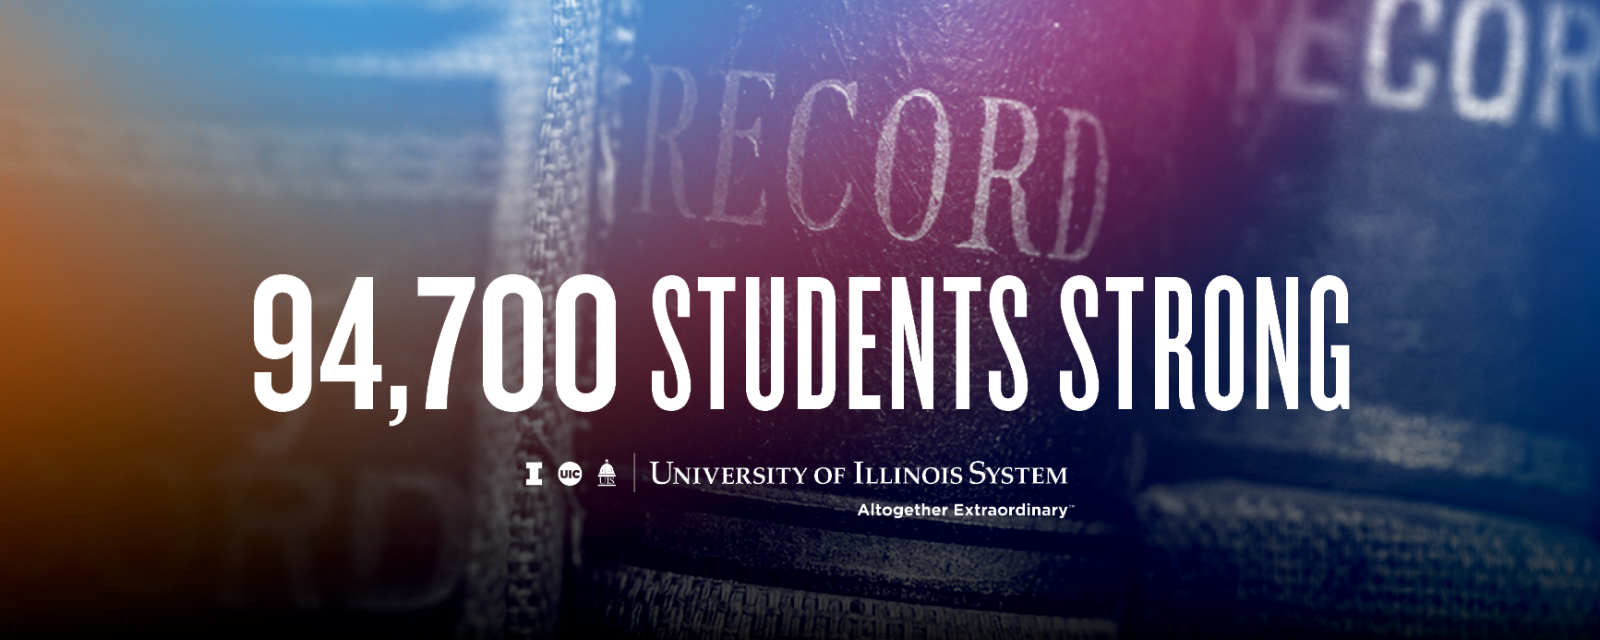 94,700 students strong graphic